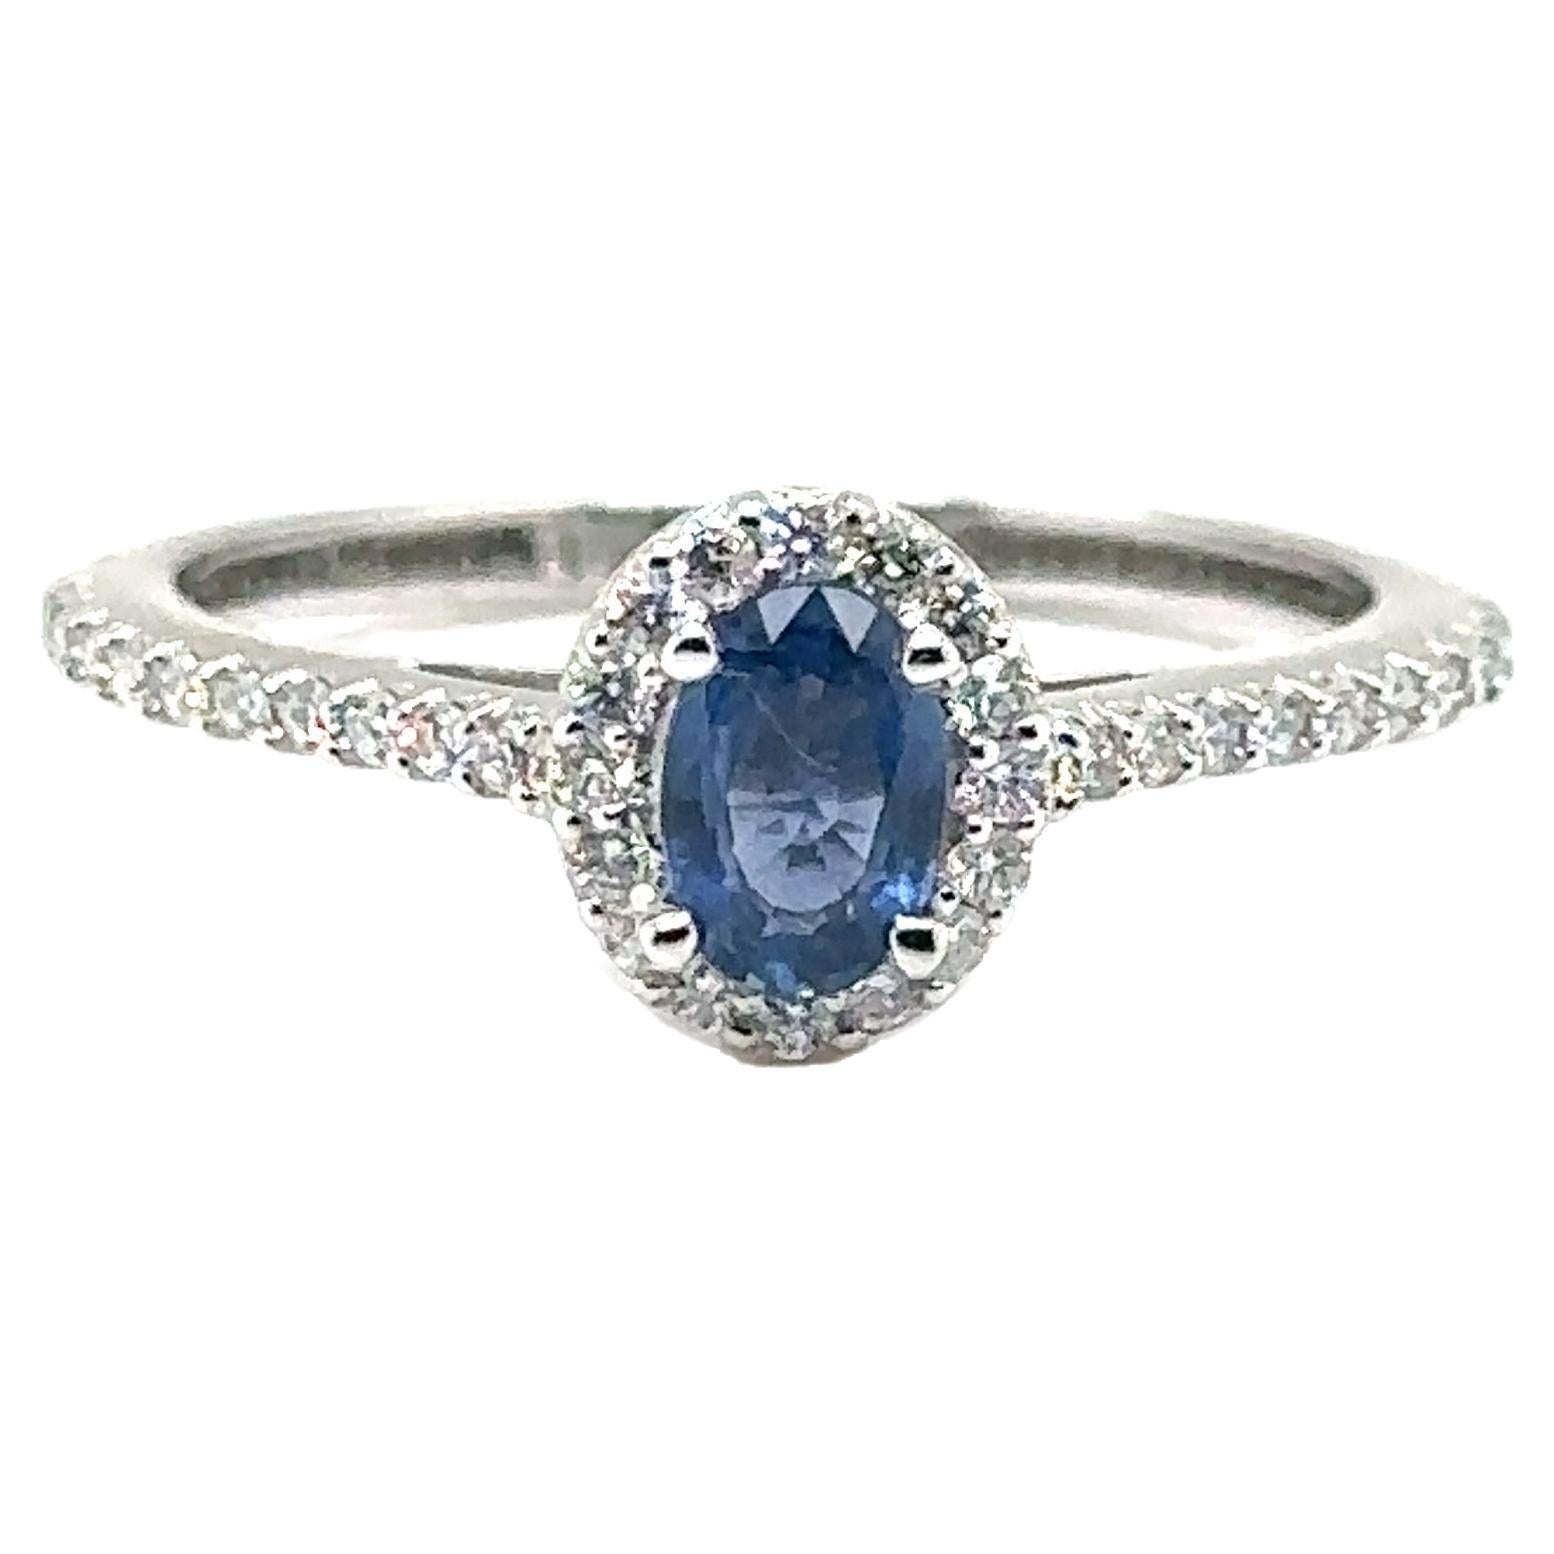 JAS-21-2244 - 14K WHITE GOLD OVAL SAPPHIRE RING with DIAMONDS  For Sale